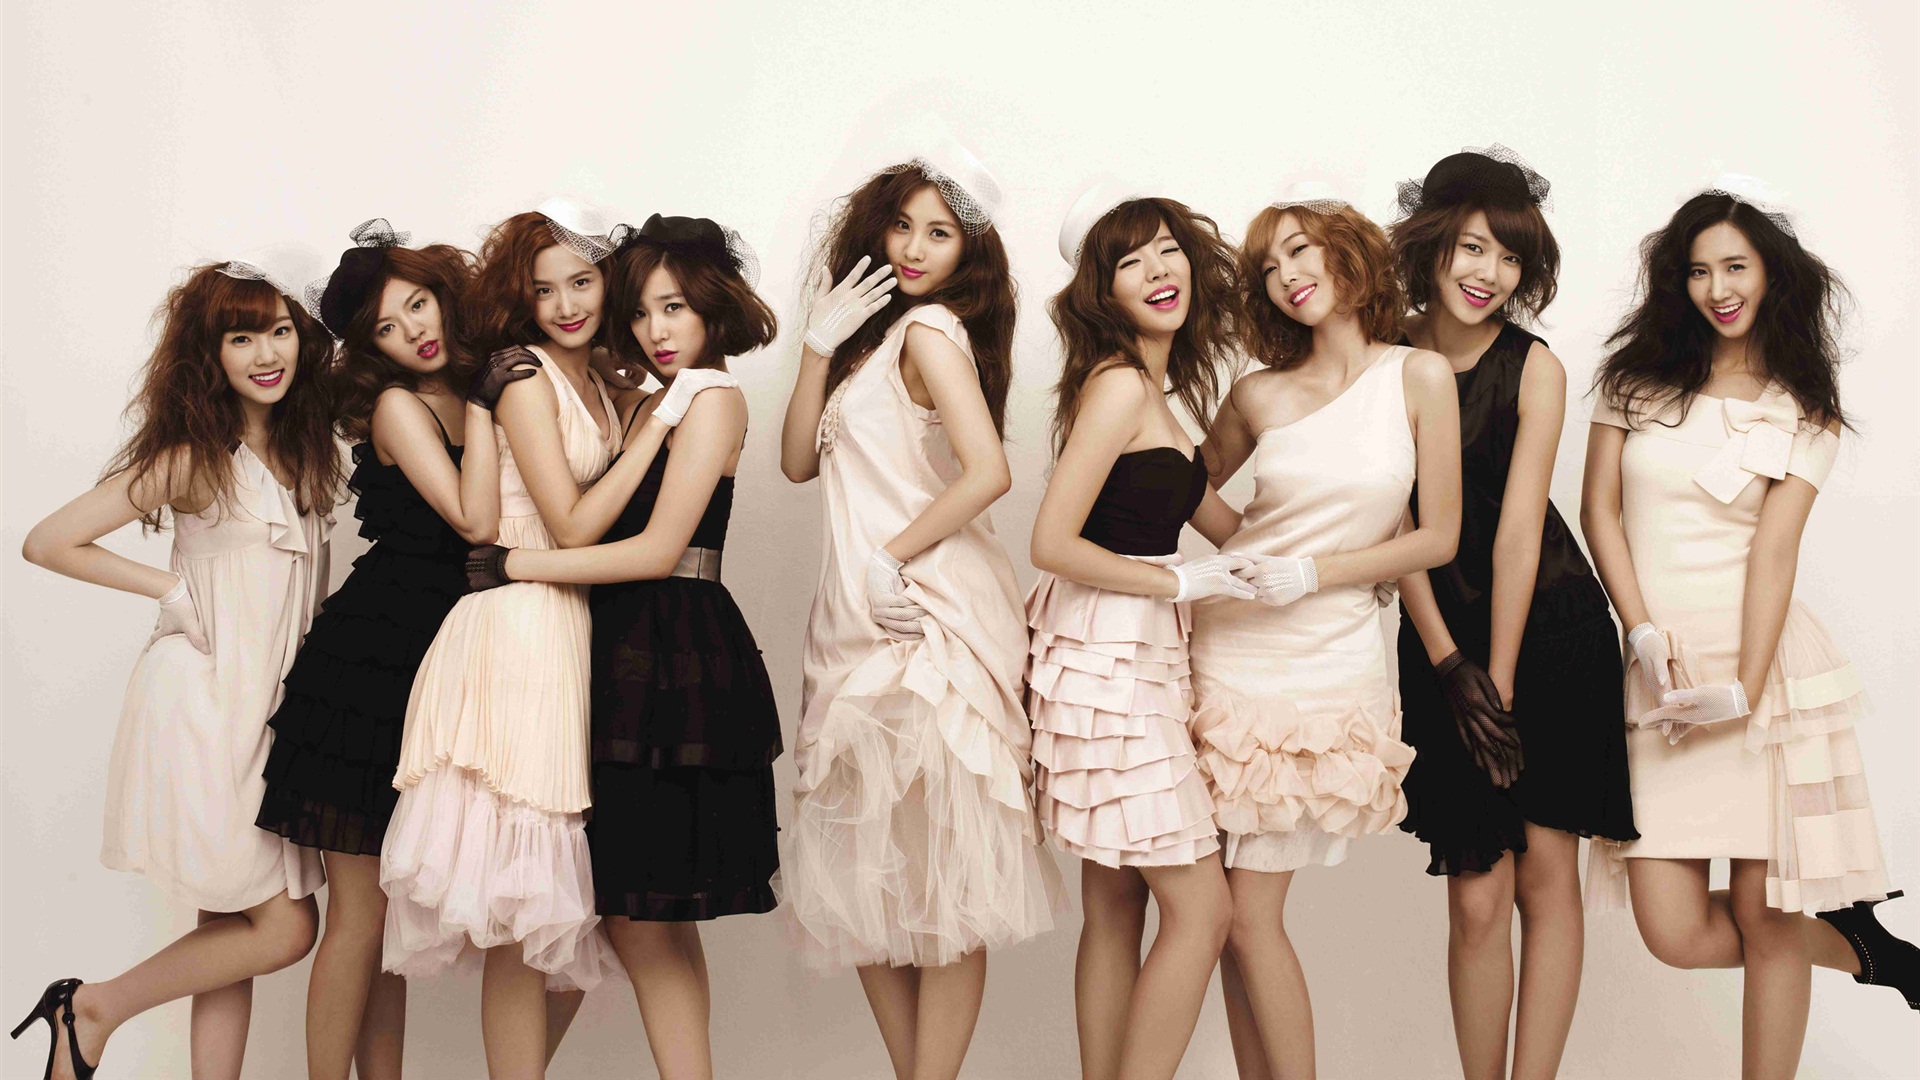 Girls Generation latest HD wallpapers collection #21 - 1920x1080